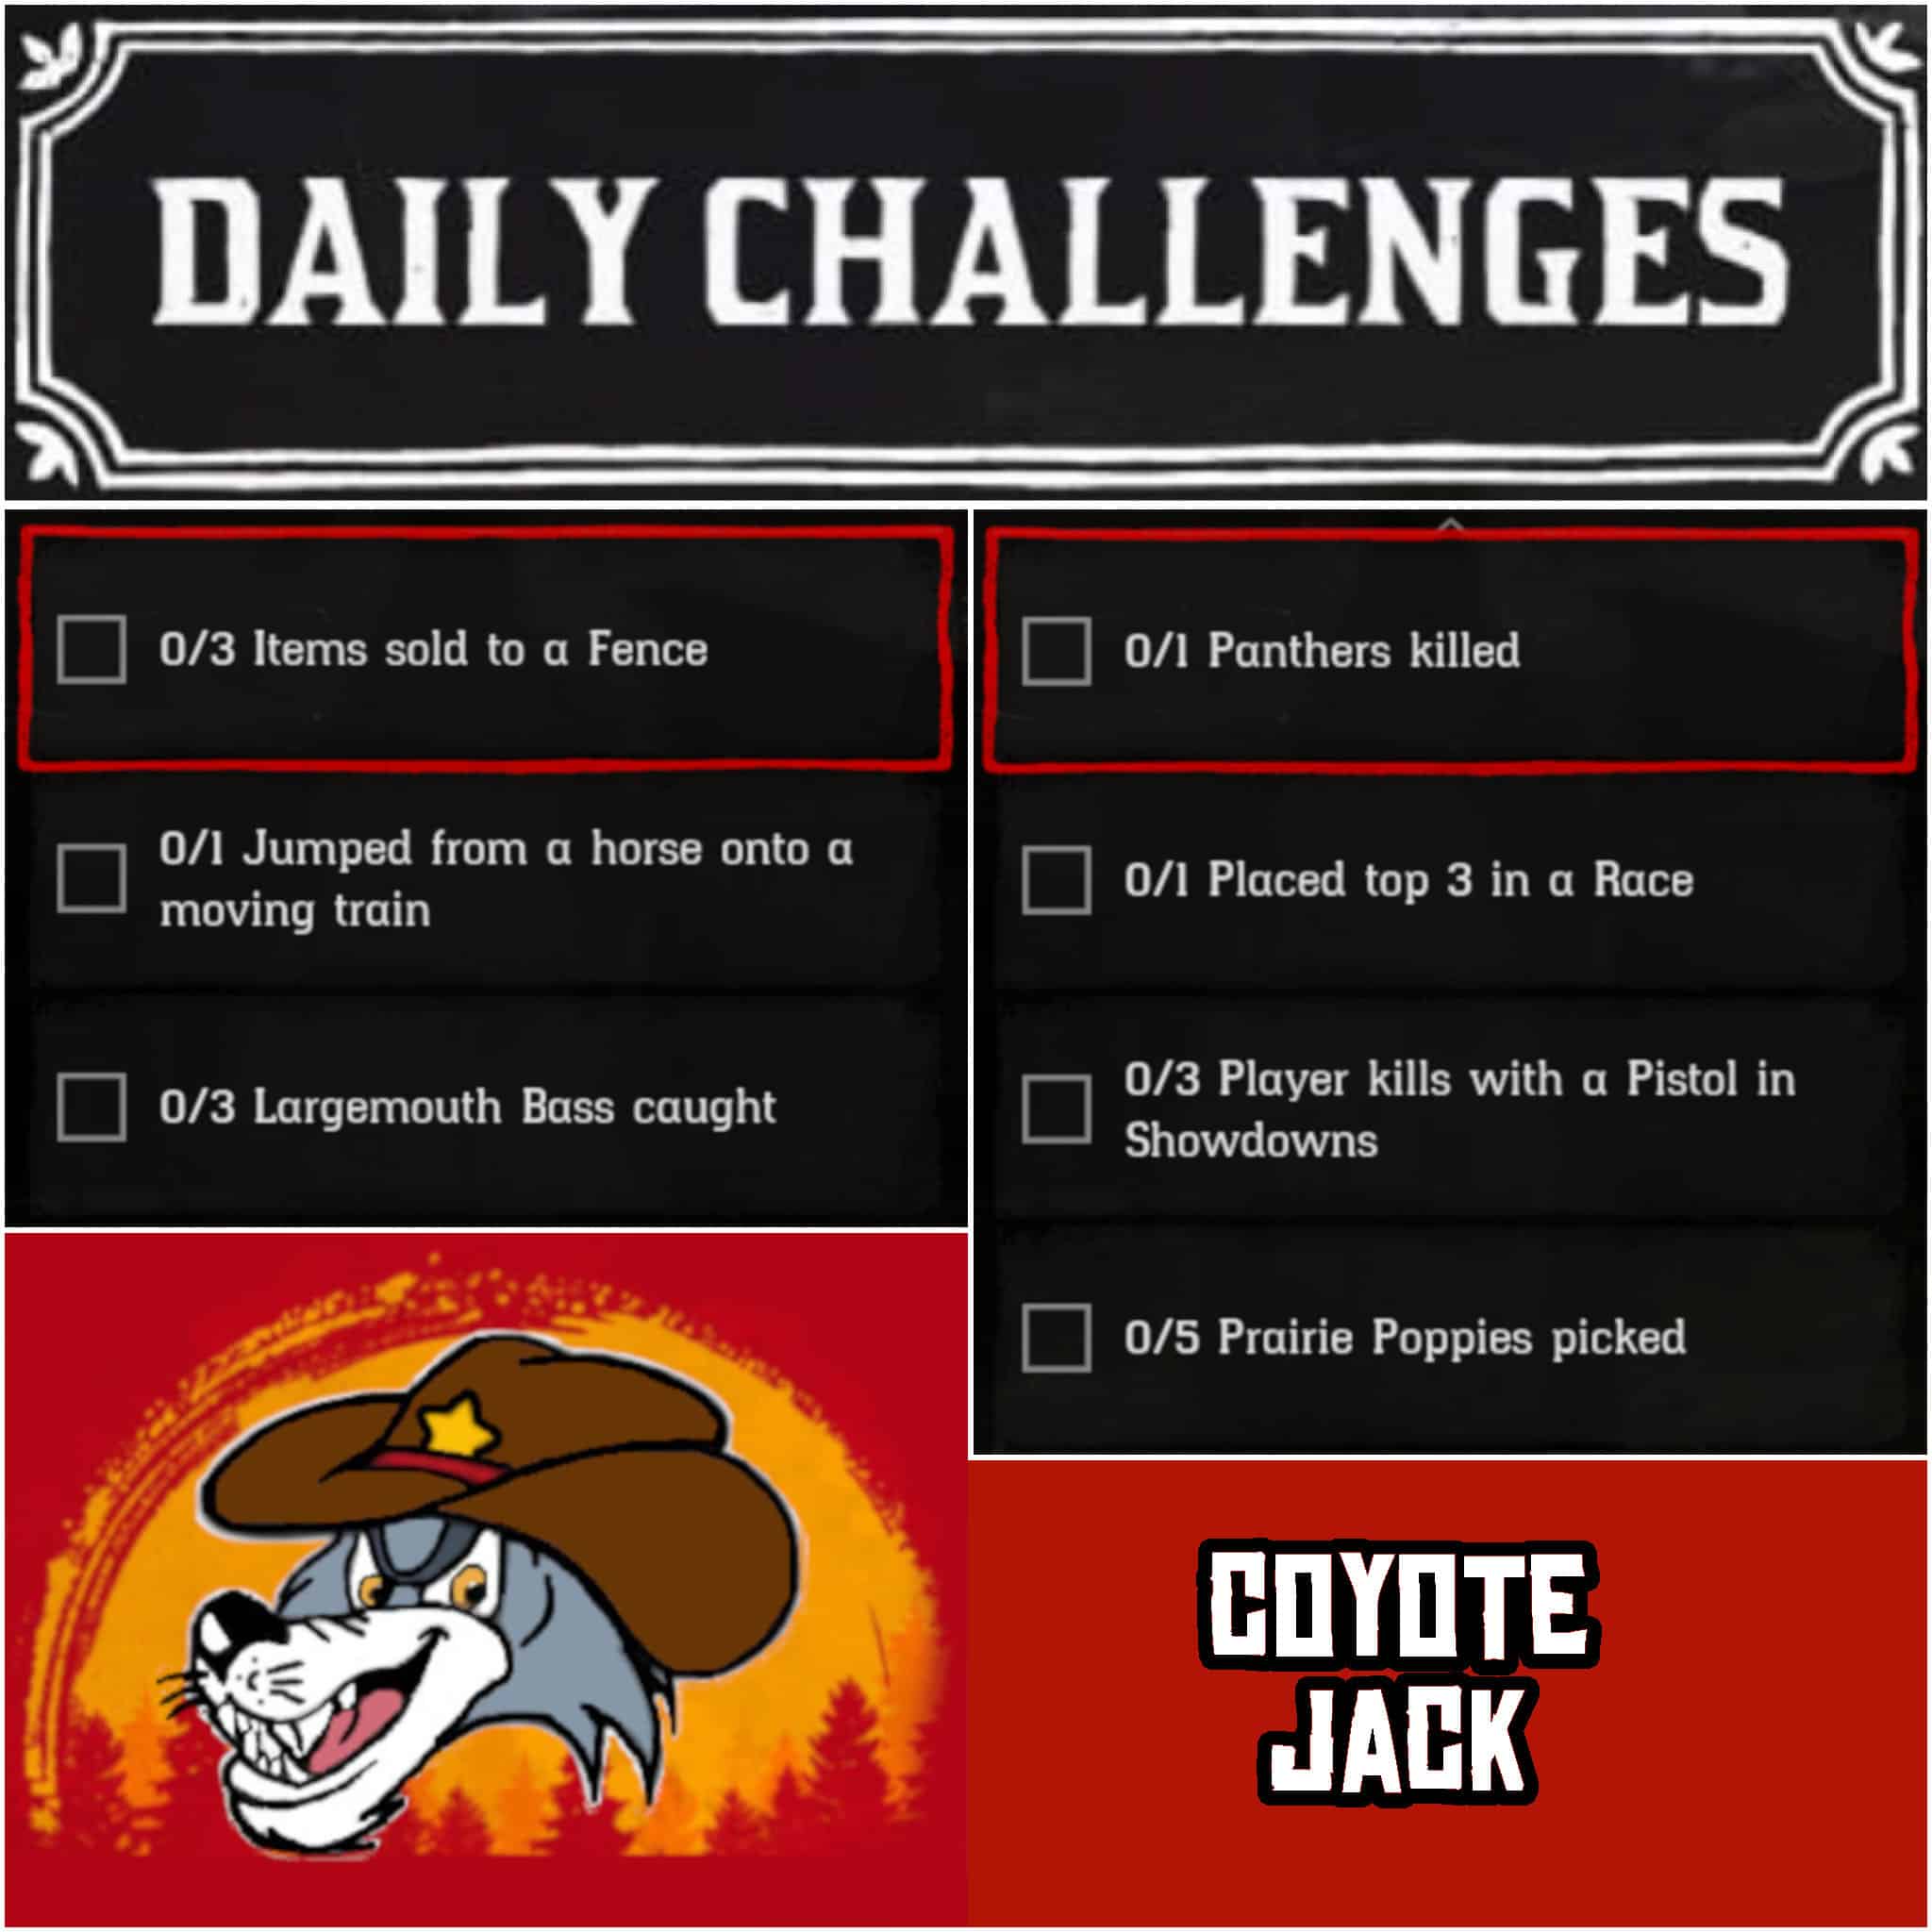 You are currently viewing Thursday 07 January Daily Challenges